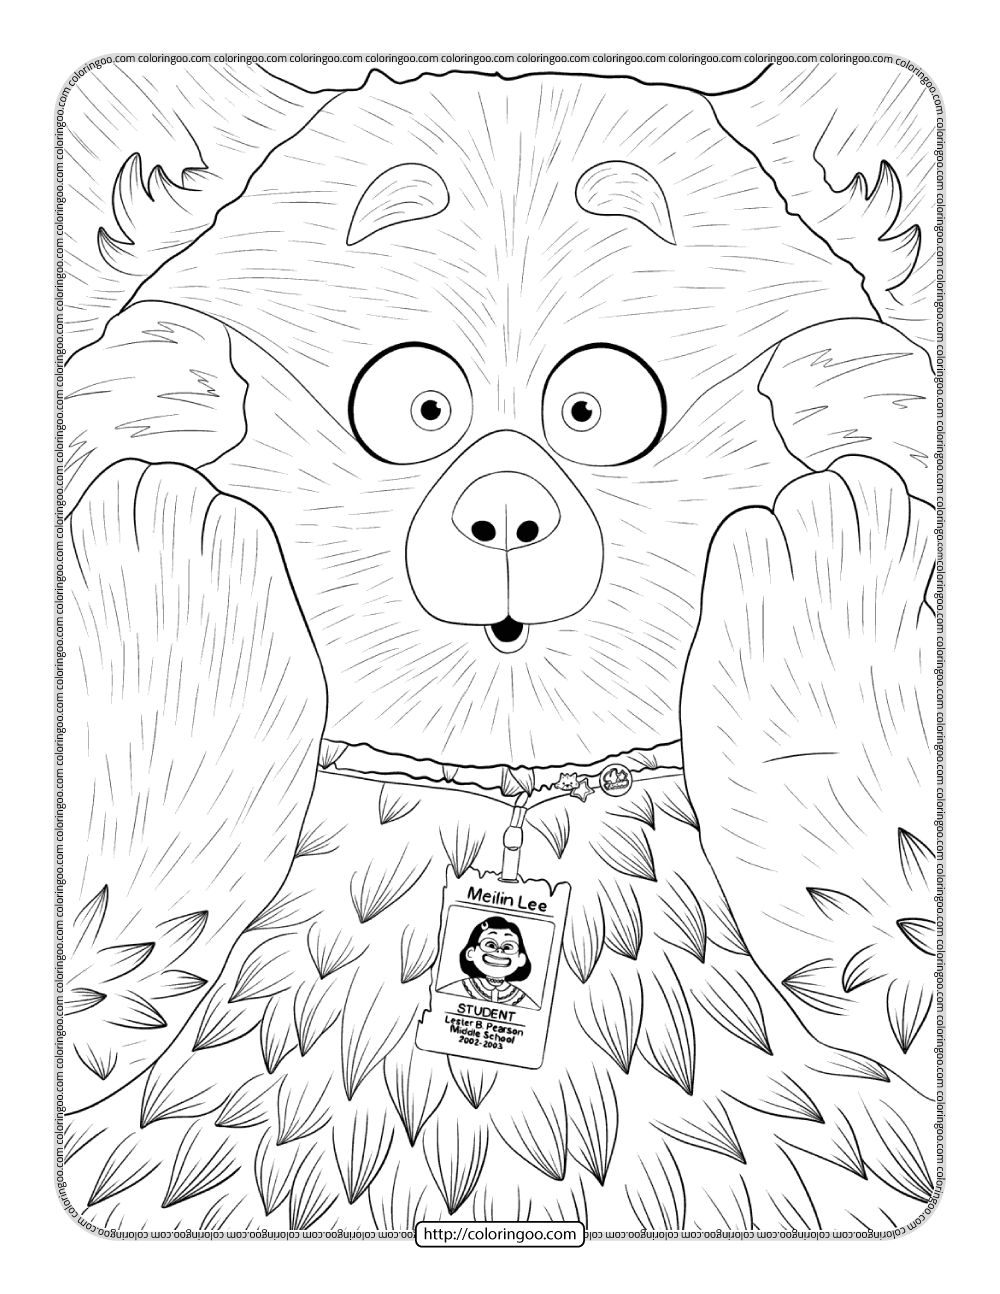 turning red surprised face coloring page